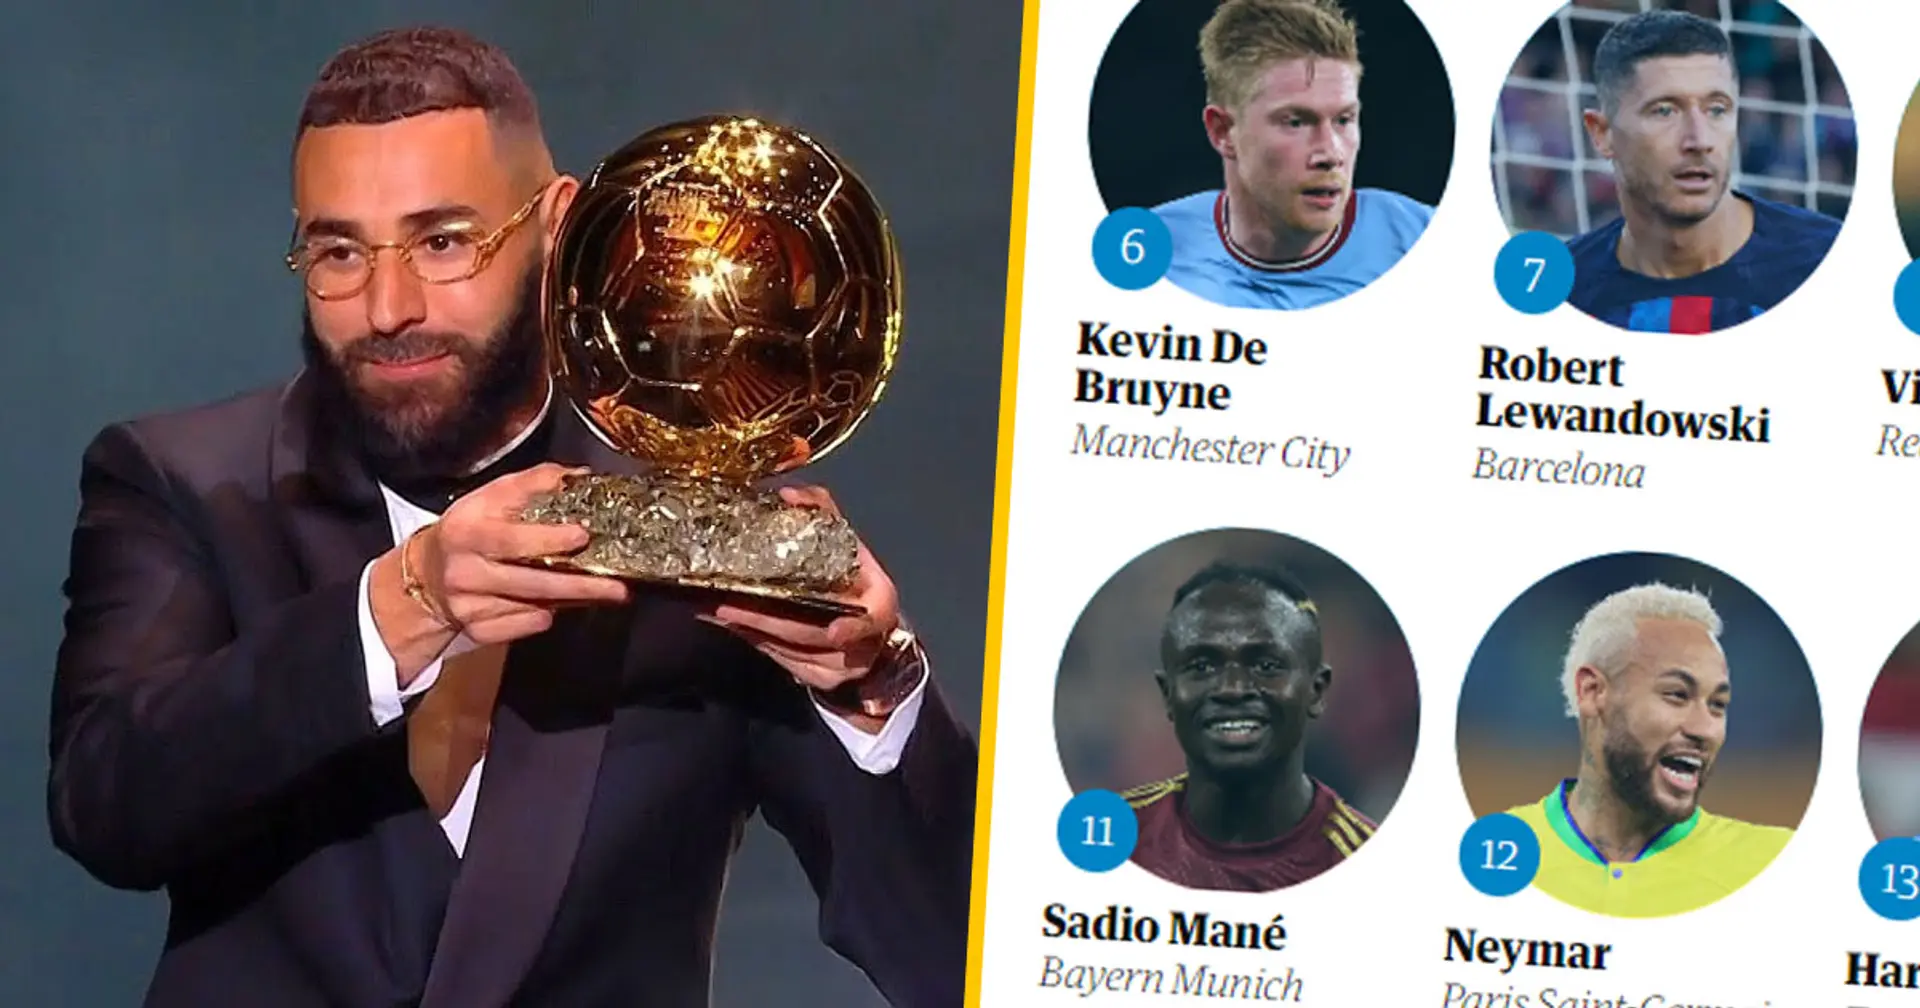 Benzema misses out on first spot, 11 Madrid players included in Guardian's top 100 best footballers for 2022